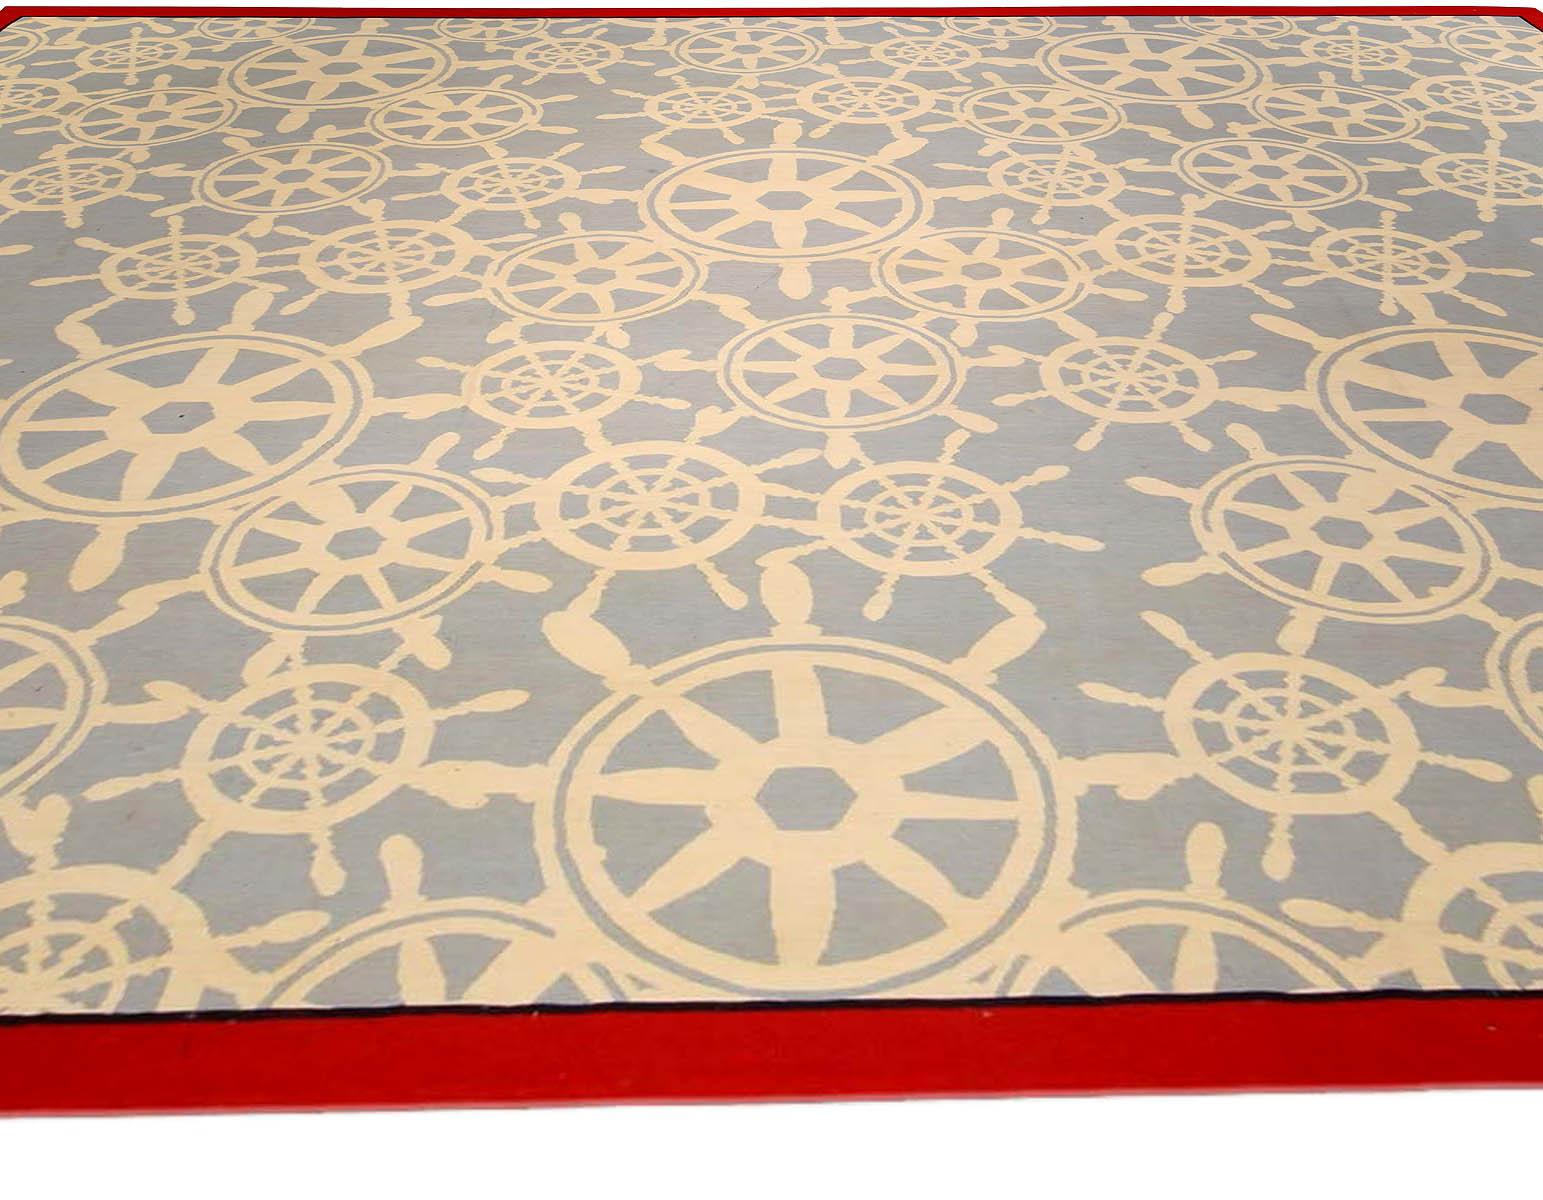 Chinese Contemporary Aubusson Red Blue Rug by Tommy Hilfiger Th2 for Doris Leslie Blau For Sale